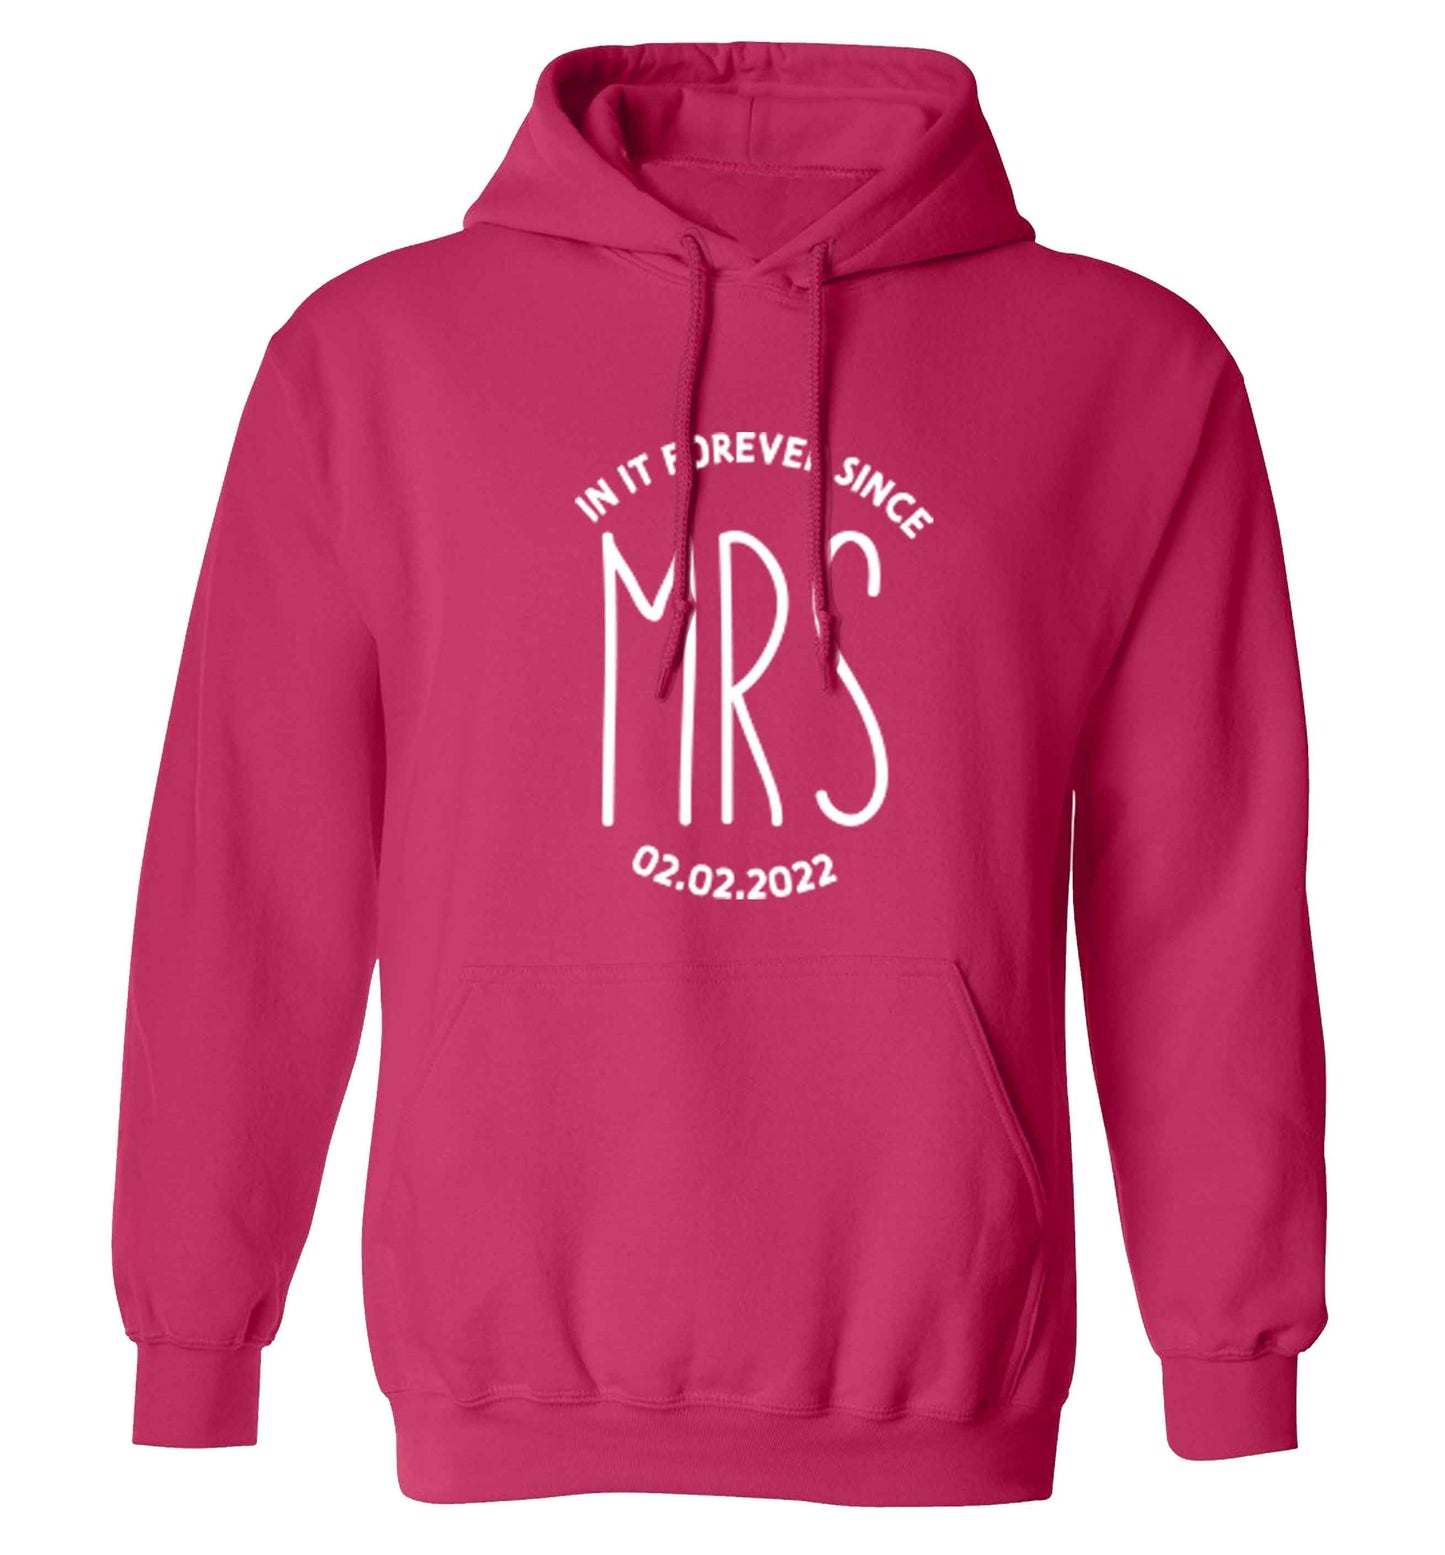 Funny matching gifts for him and her! Get matchy matchy, ideal for newlywed couples or a little valentines gift! adults unisex pink hoodie 2XL